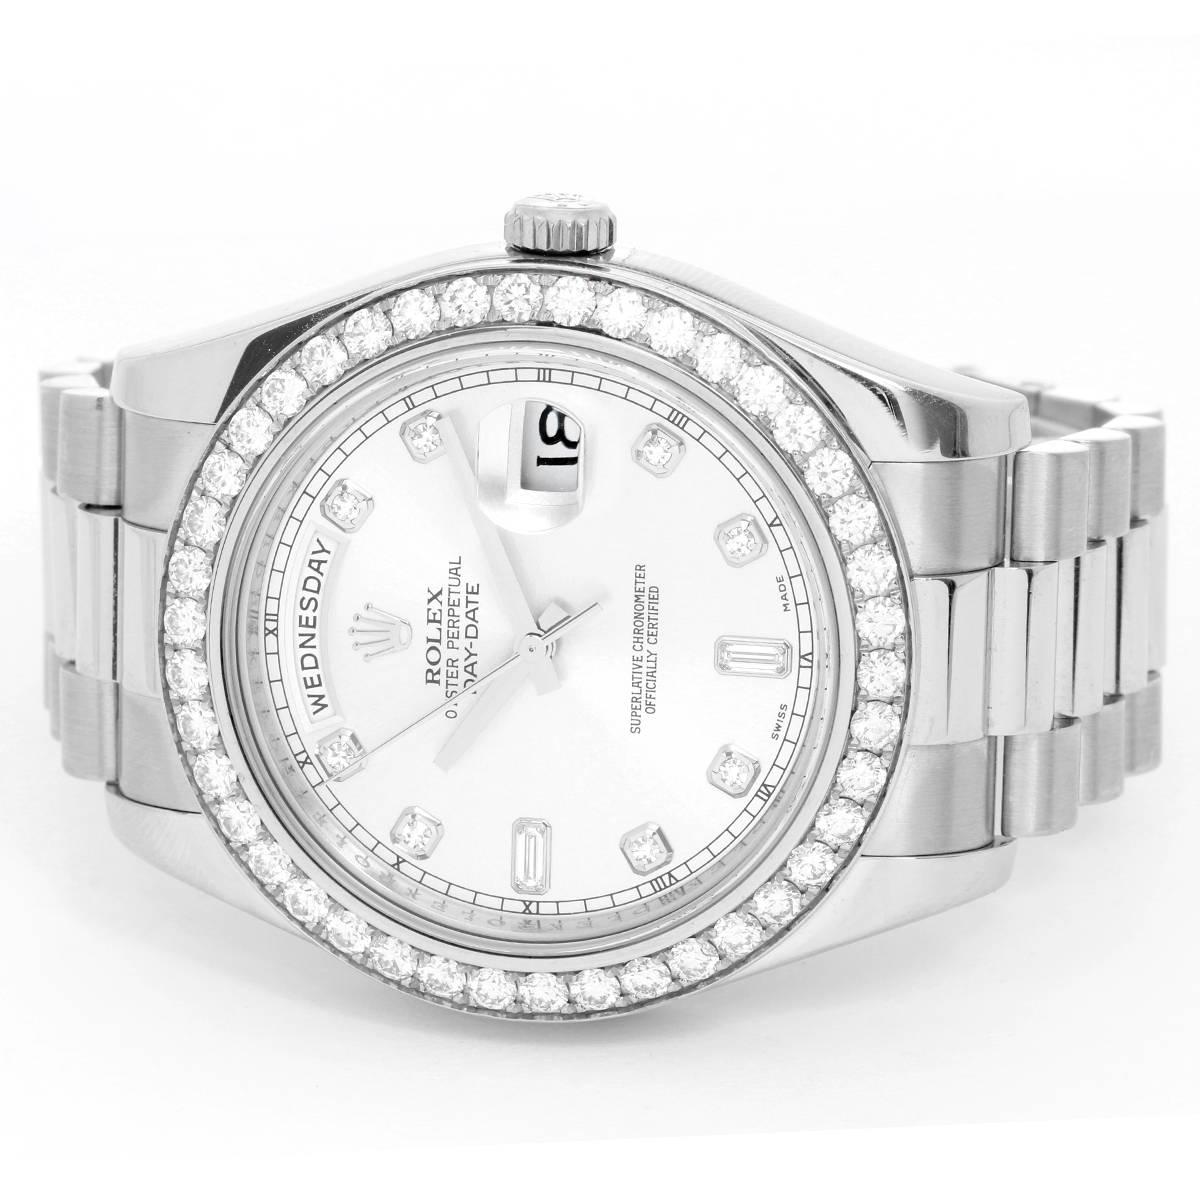 Rolex President Day-Date II Men's 18k White Gold Diamond Watch 218349 -  Automatic winding, Double Quickset, sapphire crystal. 18k white gold case with factory diamond bezel (41mm diameter). Factory silver dial with diamond hour markers. 18k white